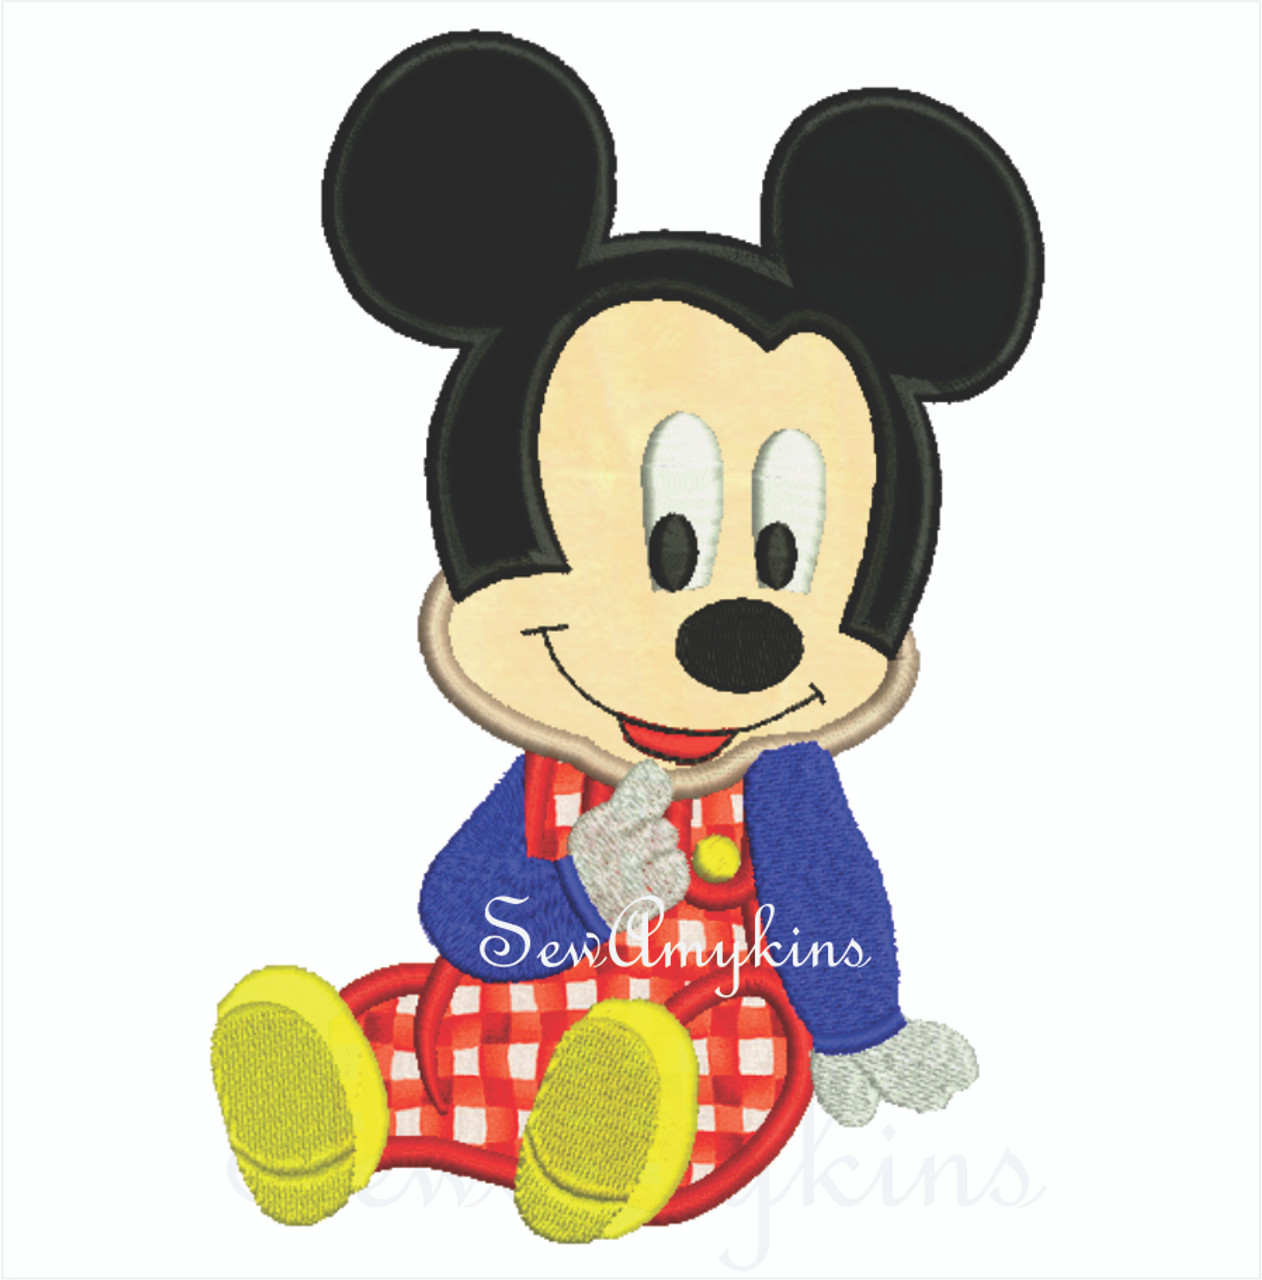 Baby Mickey Mouse applique machine embroidery design, sitting 2 sizes -  SewAmykins